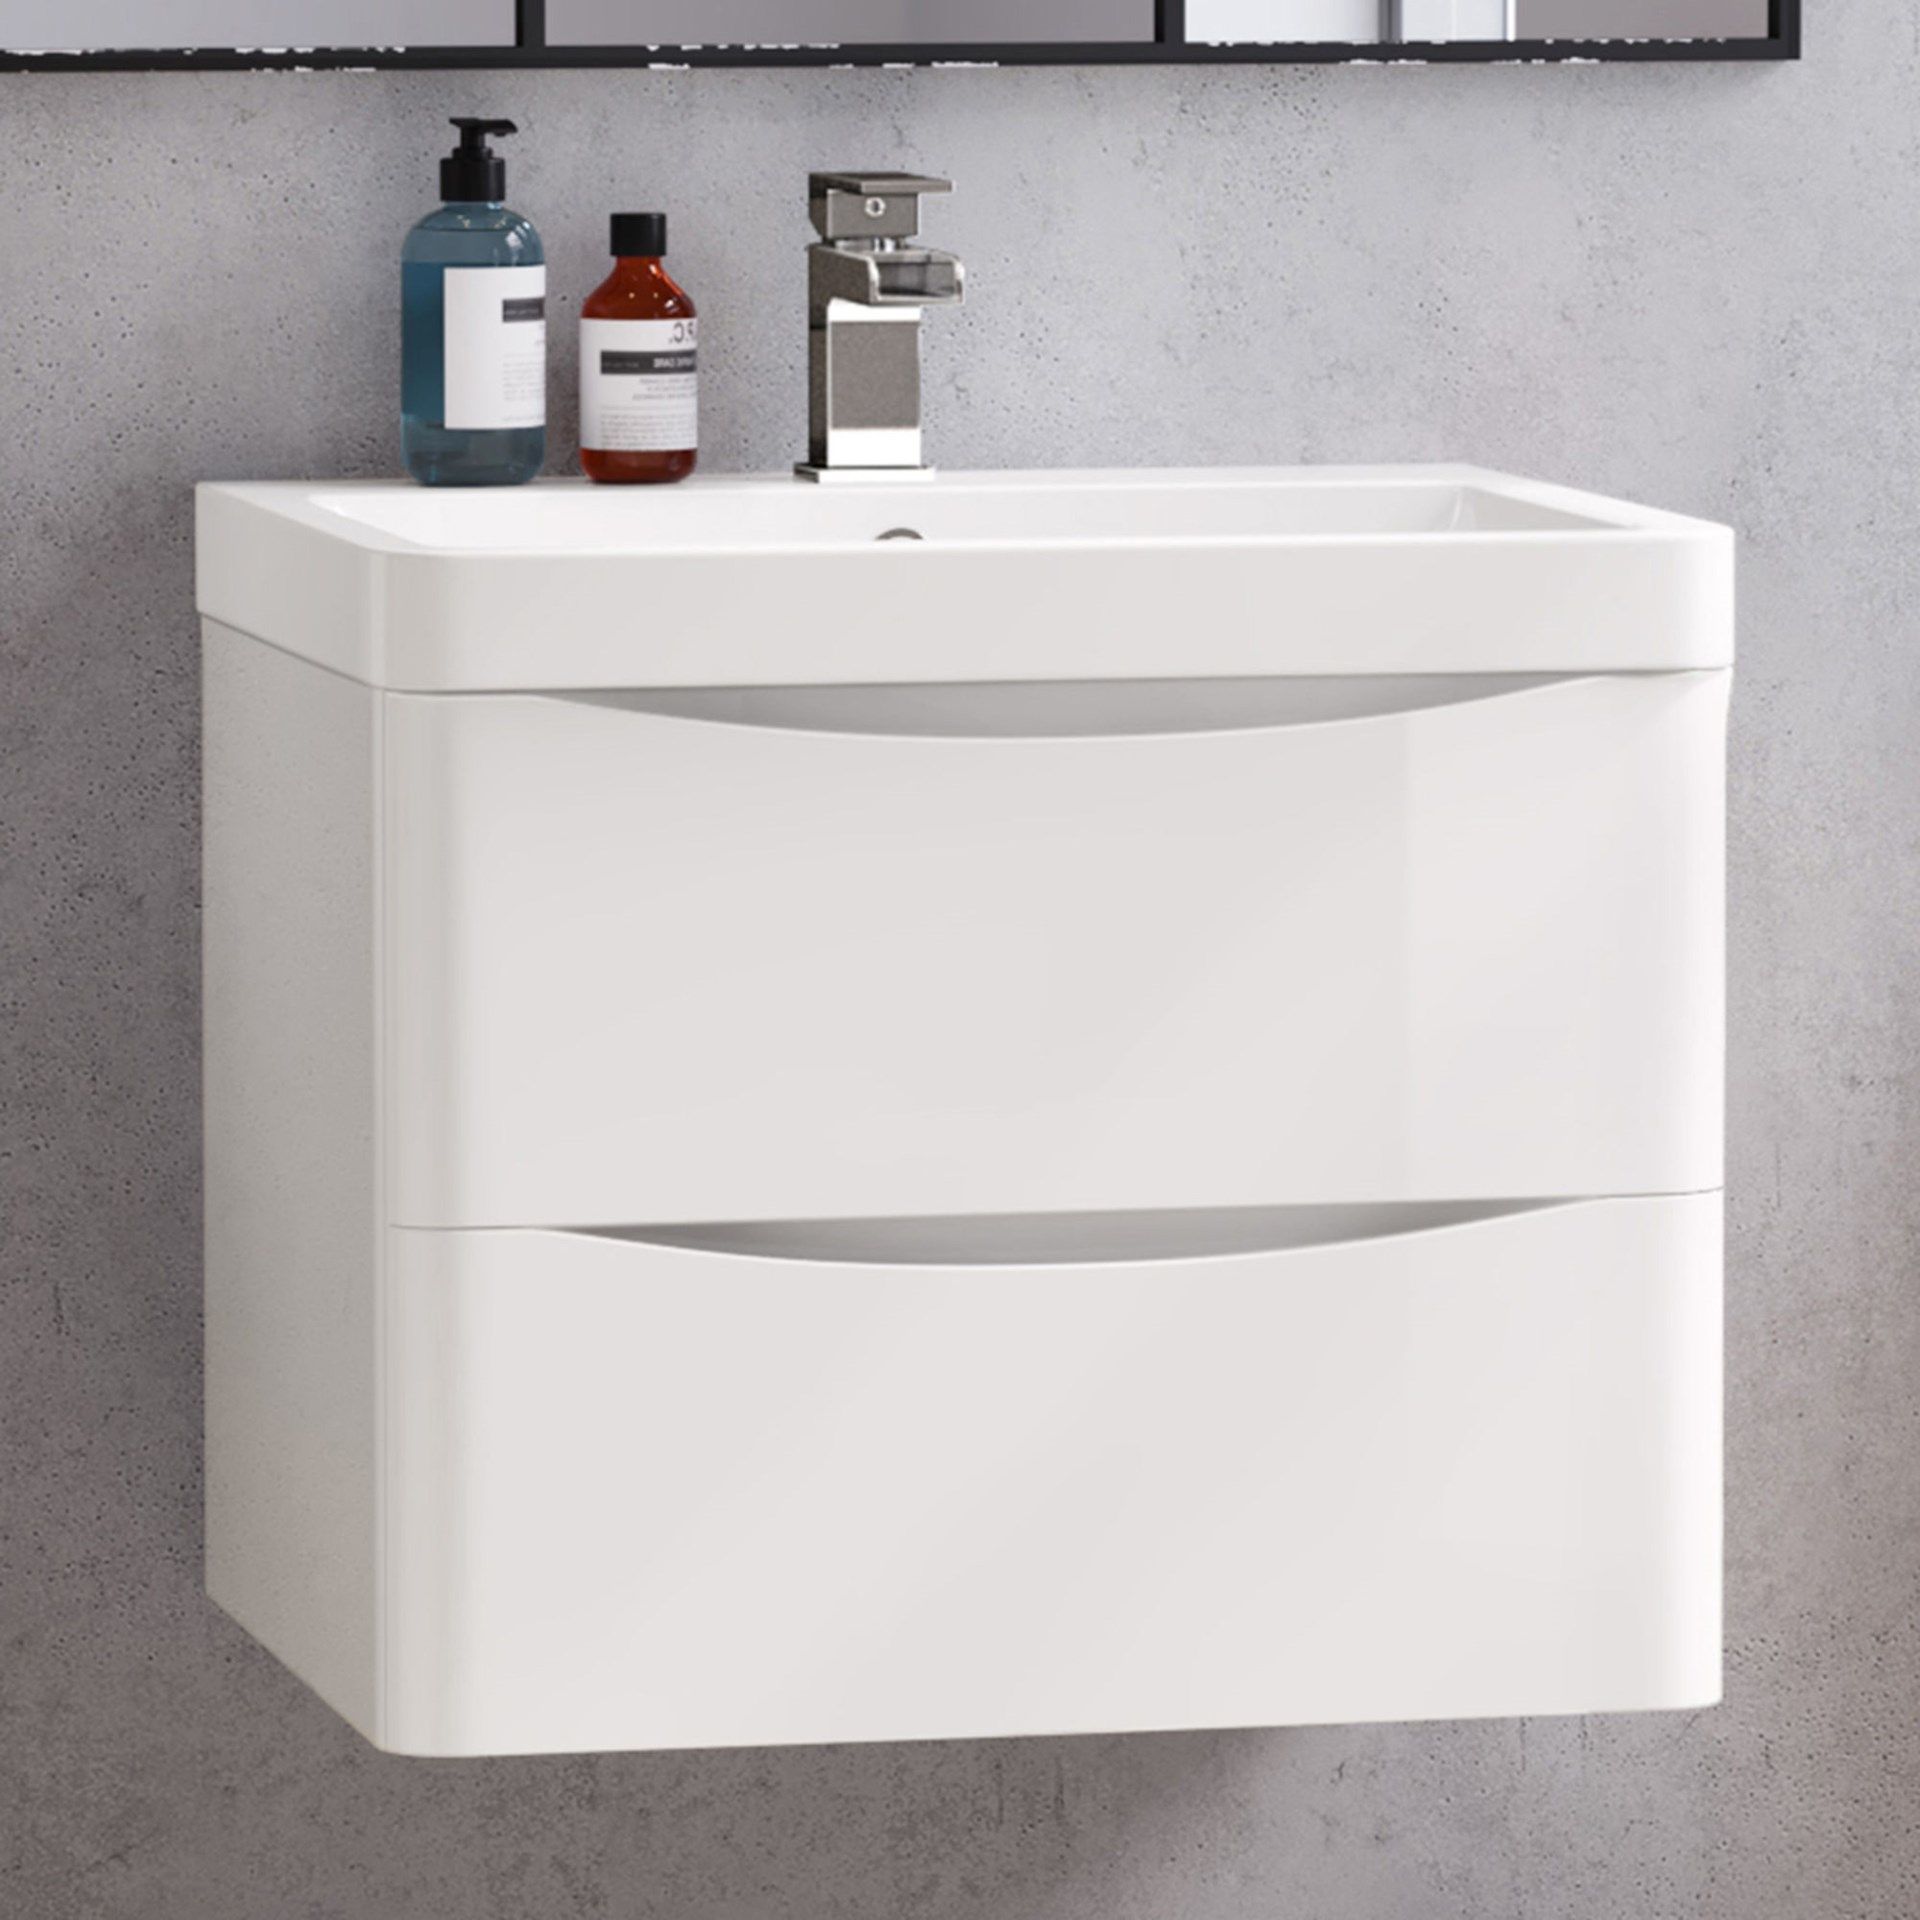 BRAND NEW BOXED 600mm Austin II Gloss White Built In Basin Drawer Unit - Wall Hung.RRP £849.99...